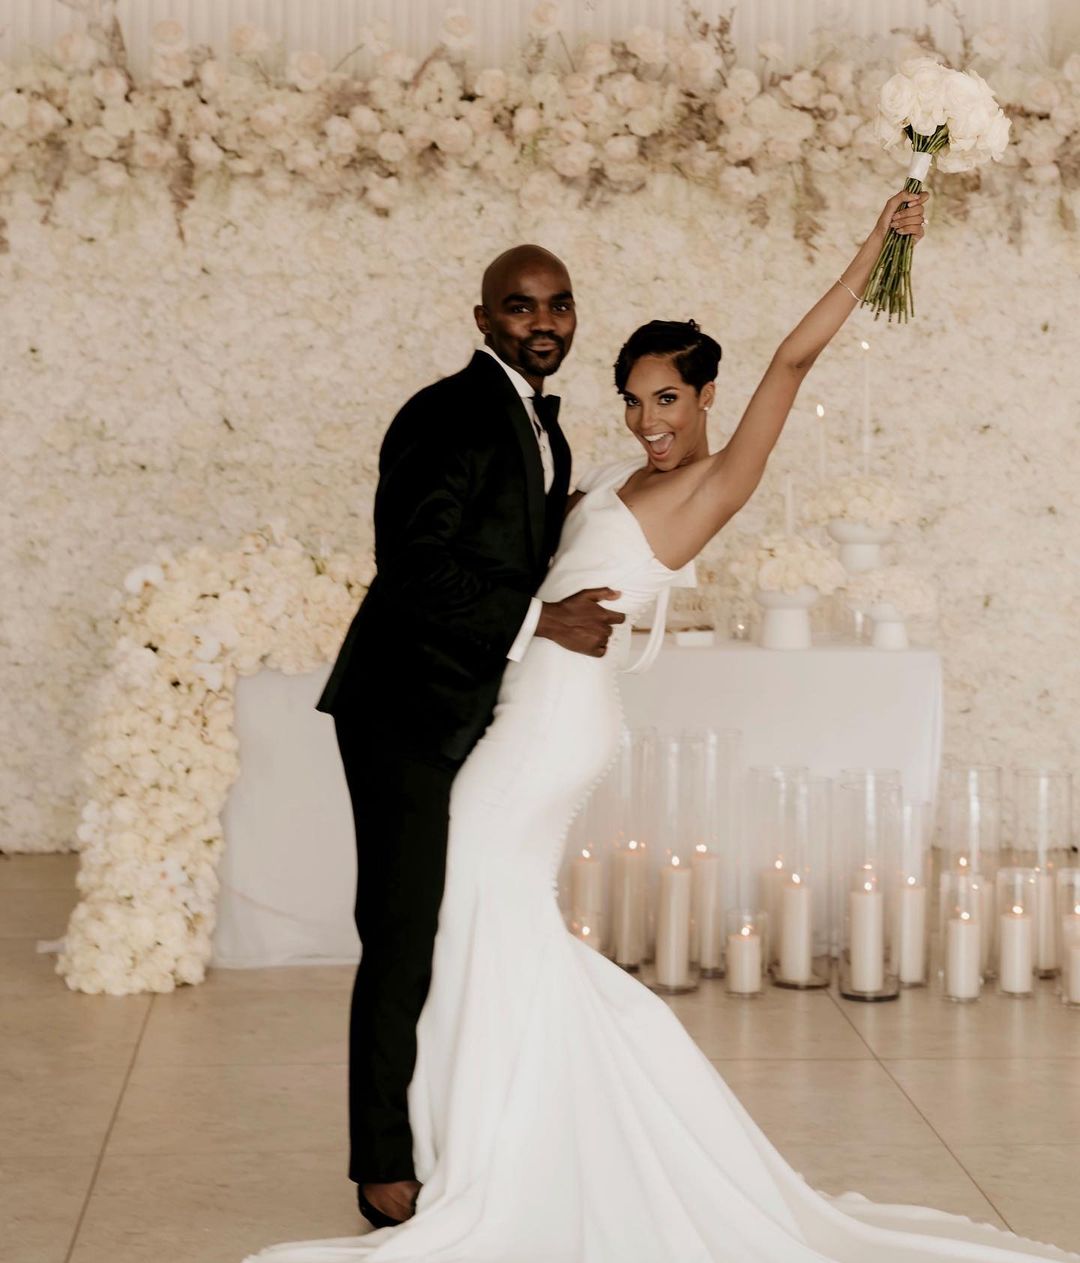 More photos from Liesl Laurie and Dr Musa’s white wedding